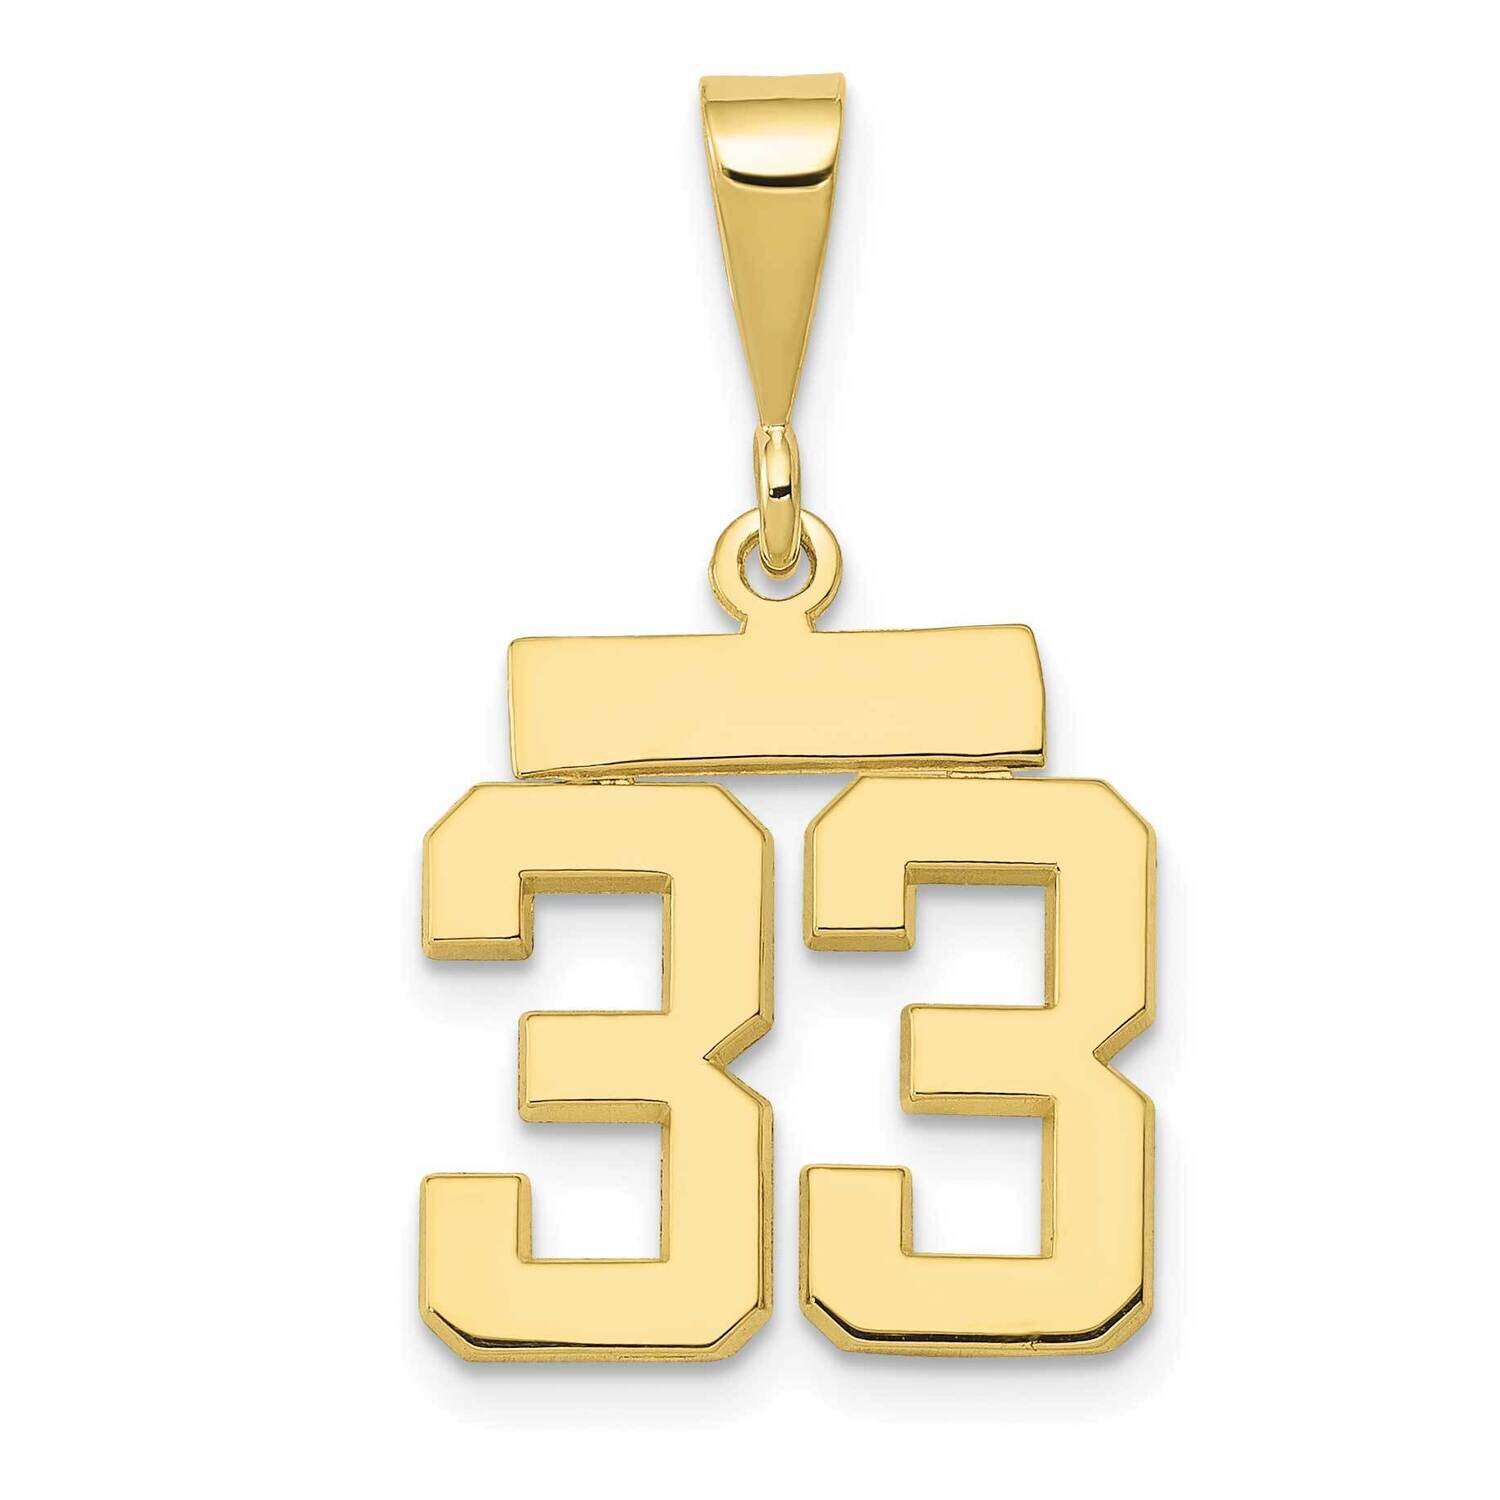 Polished Number 33 Charm 10k Gold Casted Small 10SP33